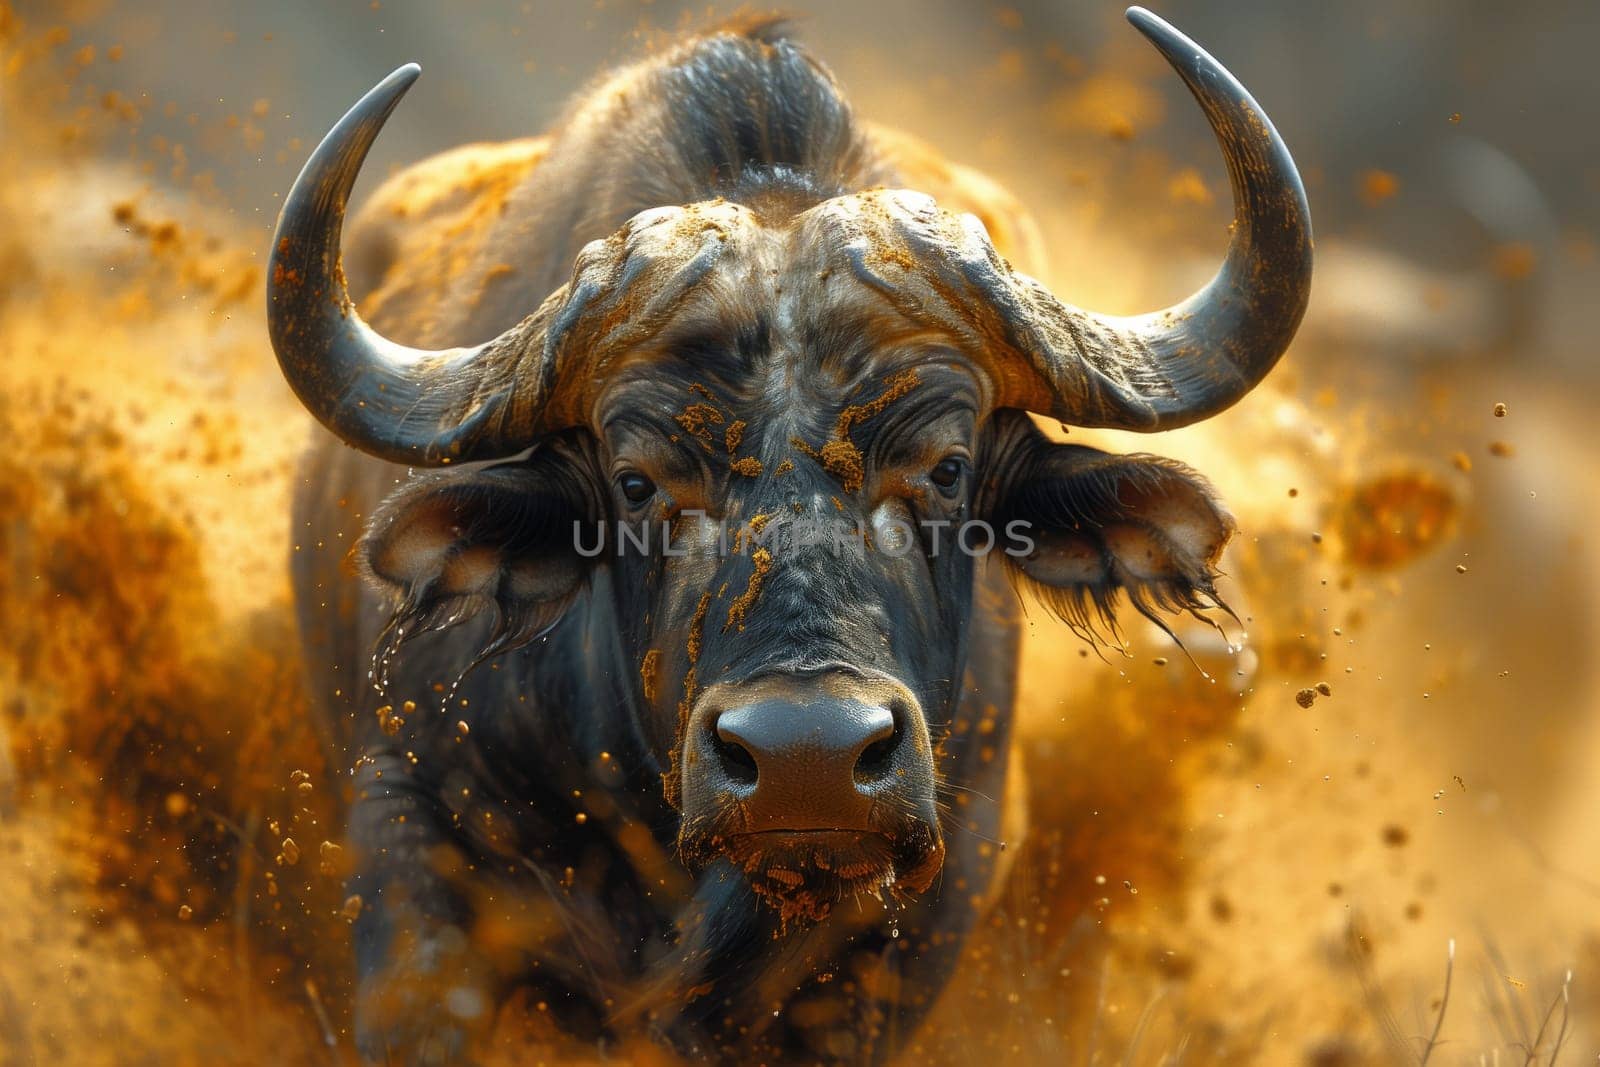 A bull, a terrestrial organism, is charging through a muddy field. This working animal with horns and a snout is a majestic sight in the landscape, embodying the strength and power of wildlife